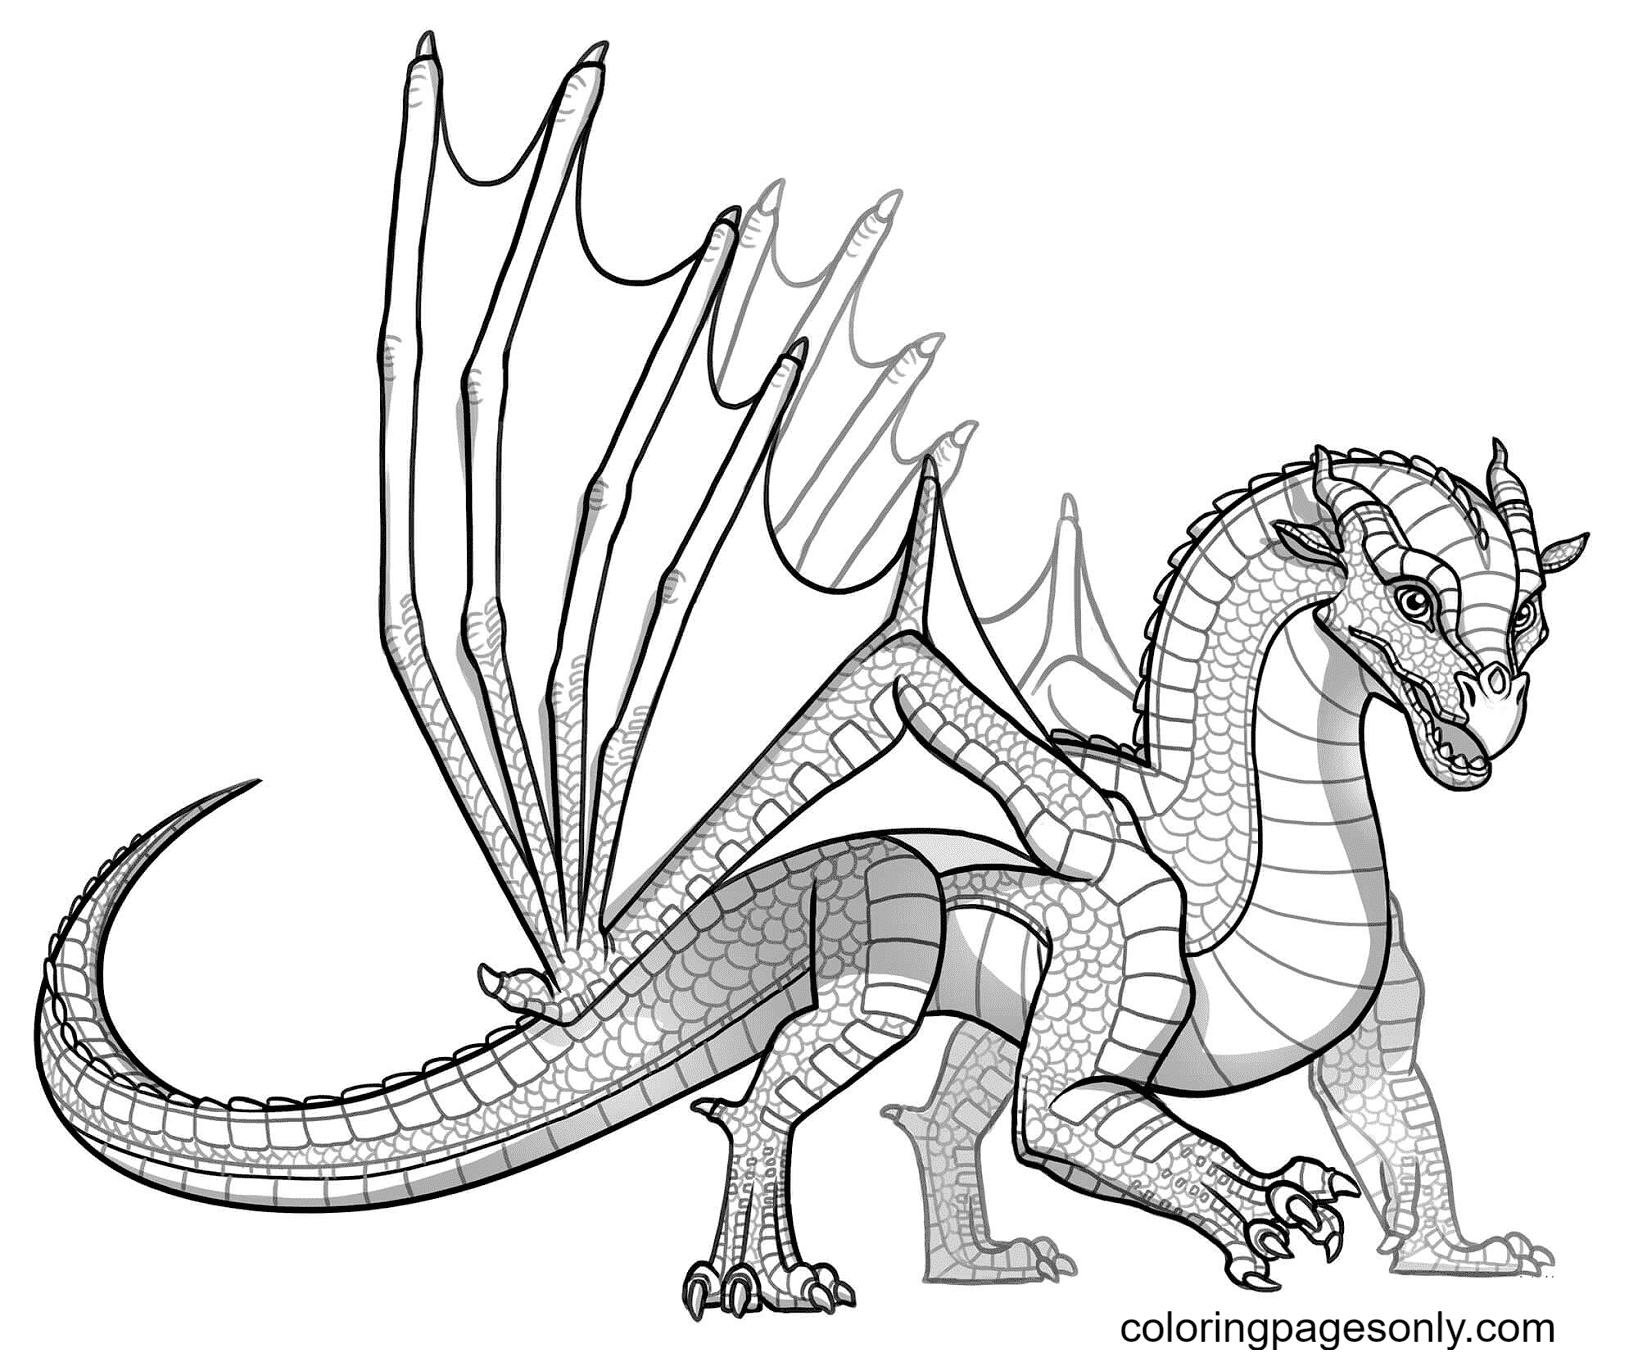 Icewing Dragon Wings Of Fire Coloring Page Free Printable Coloring Pages